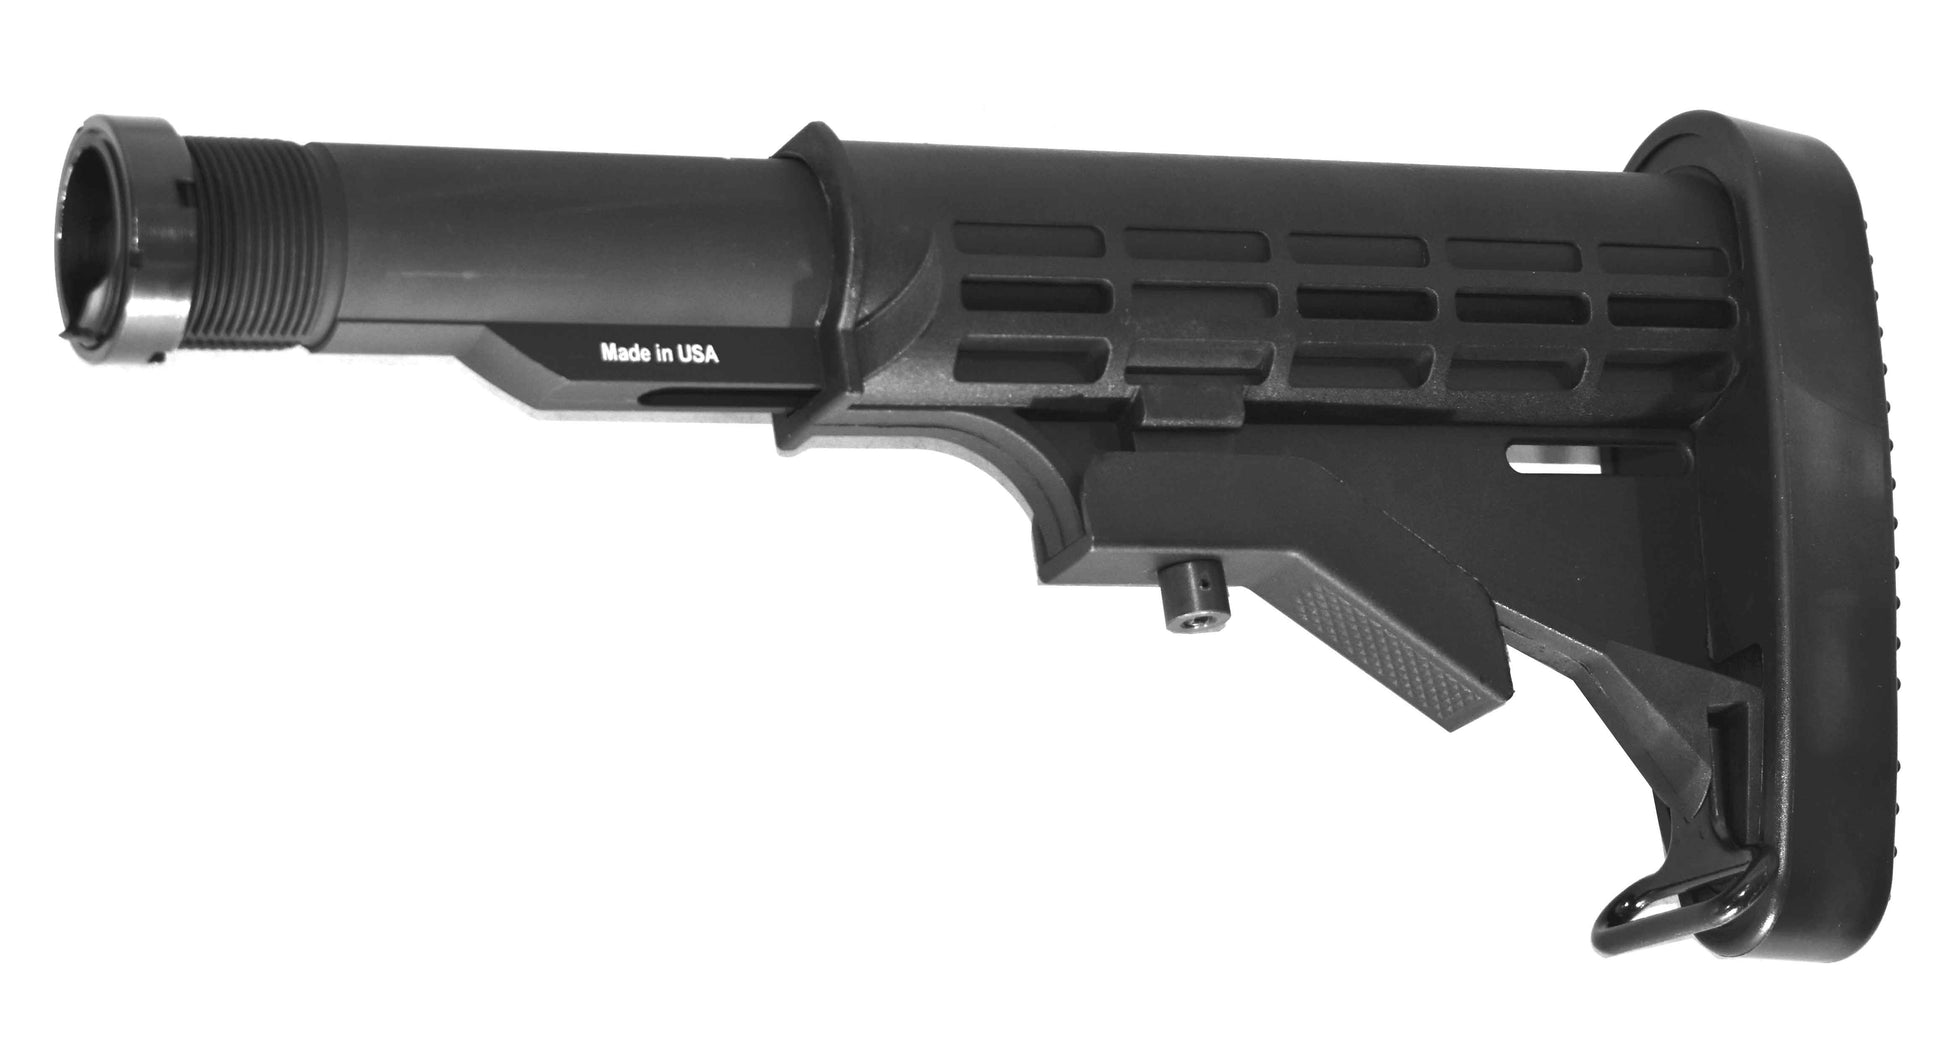 mossberg 500 stock compatible with pistol grips.